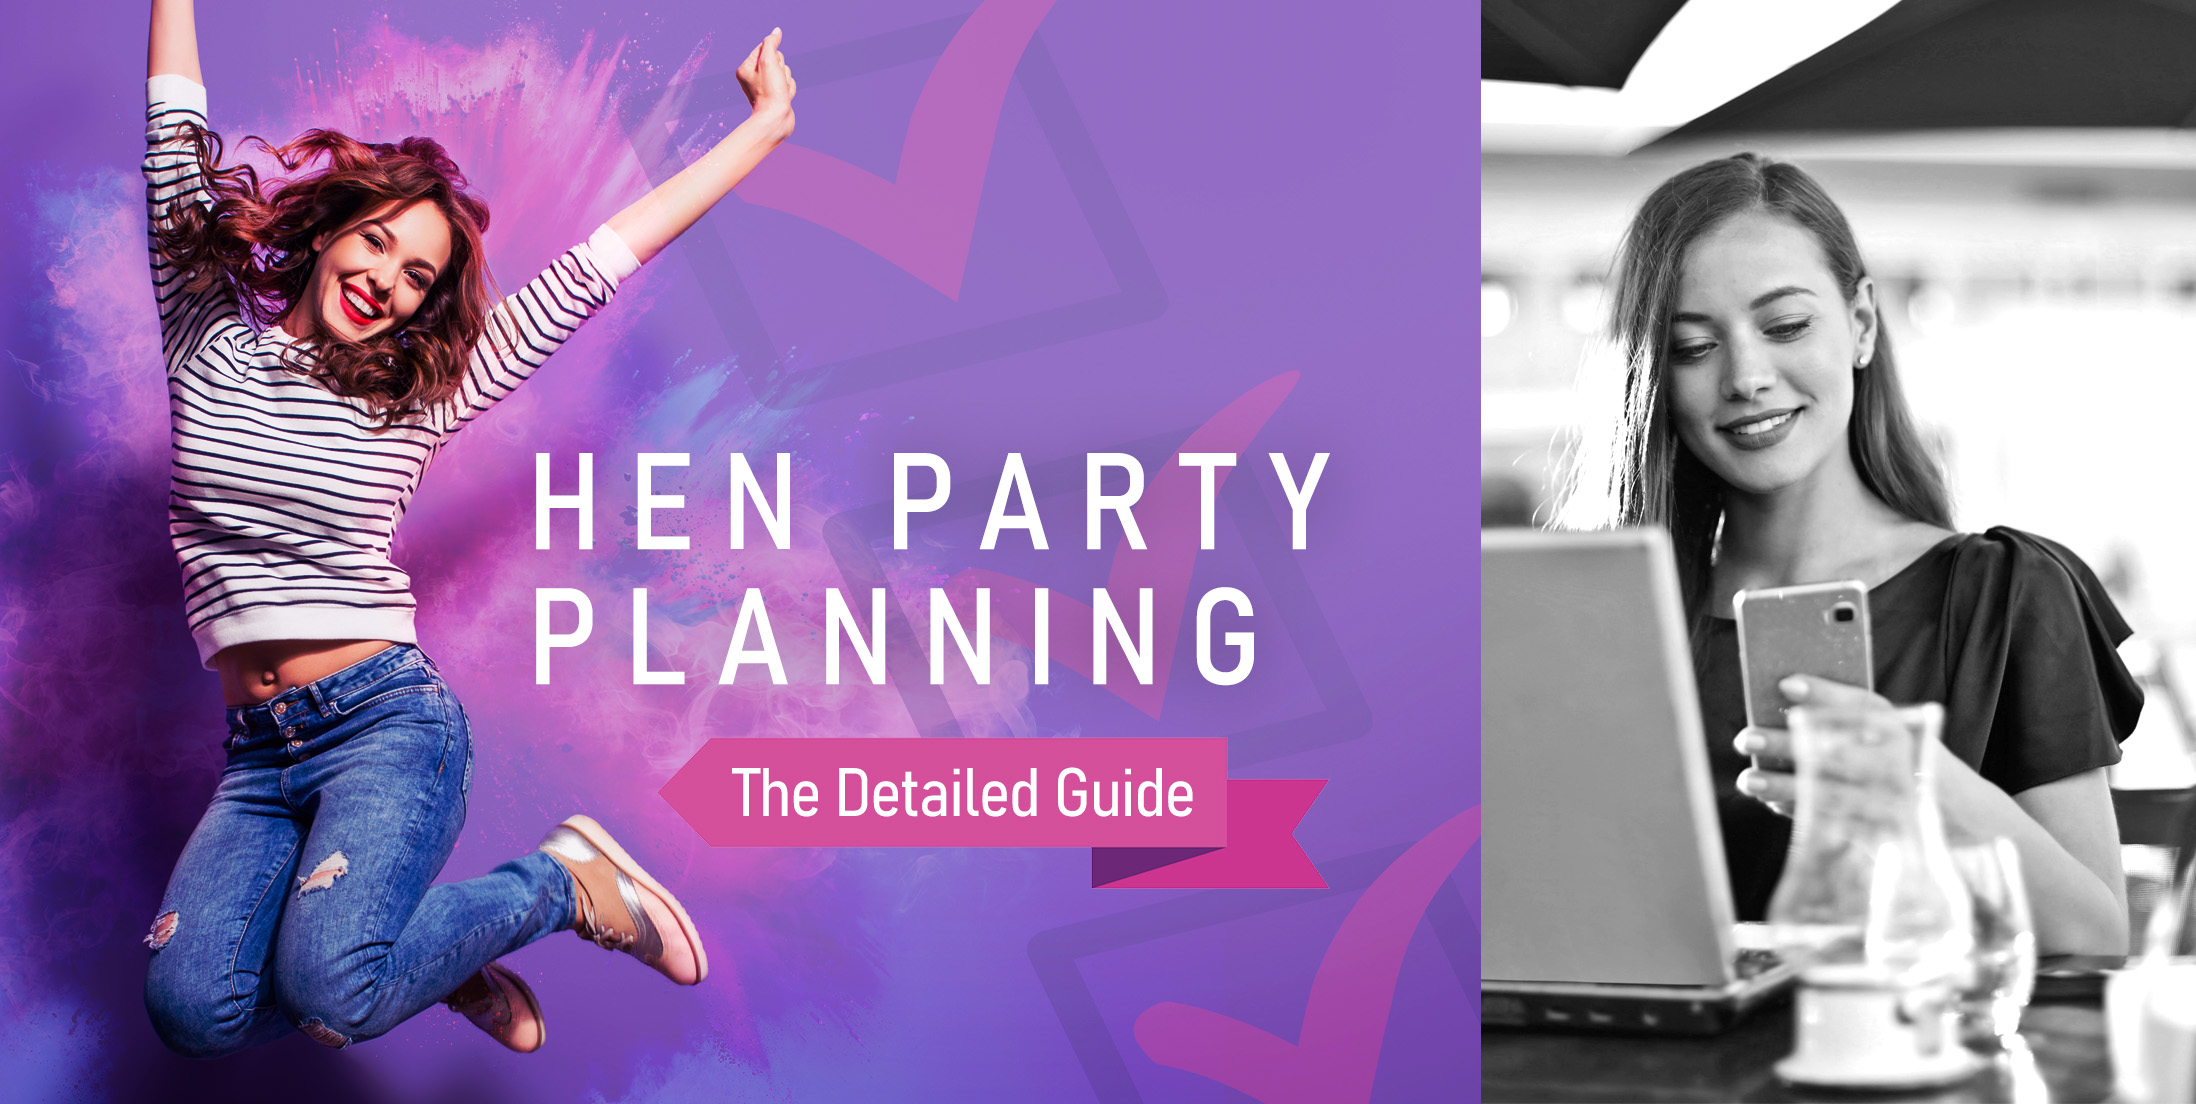 Hen Do Planning - The Detailed Guide